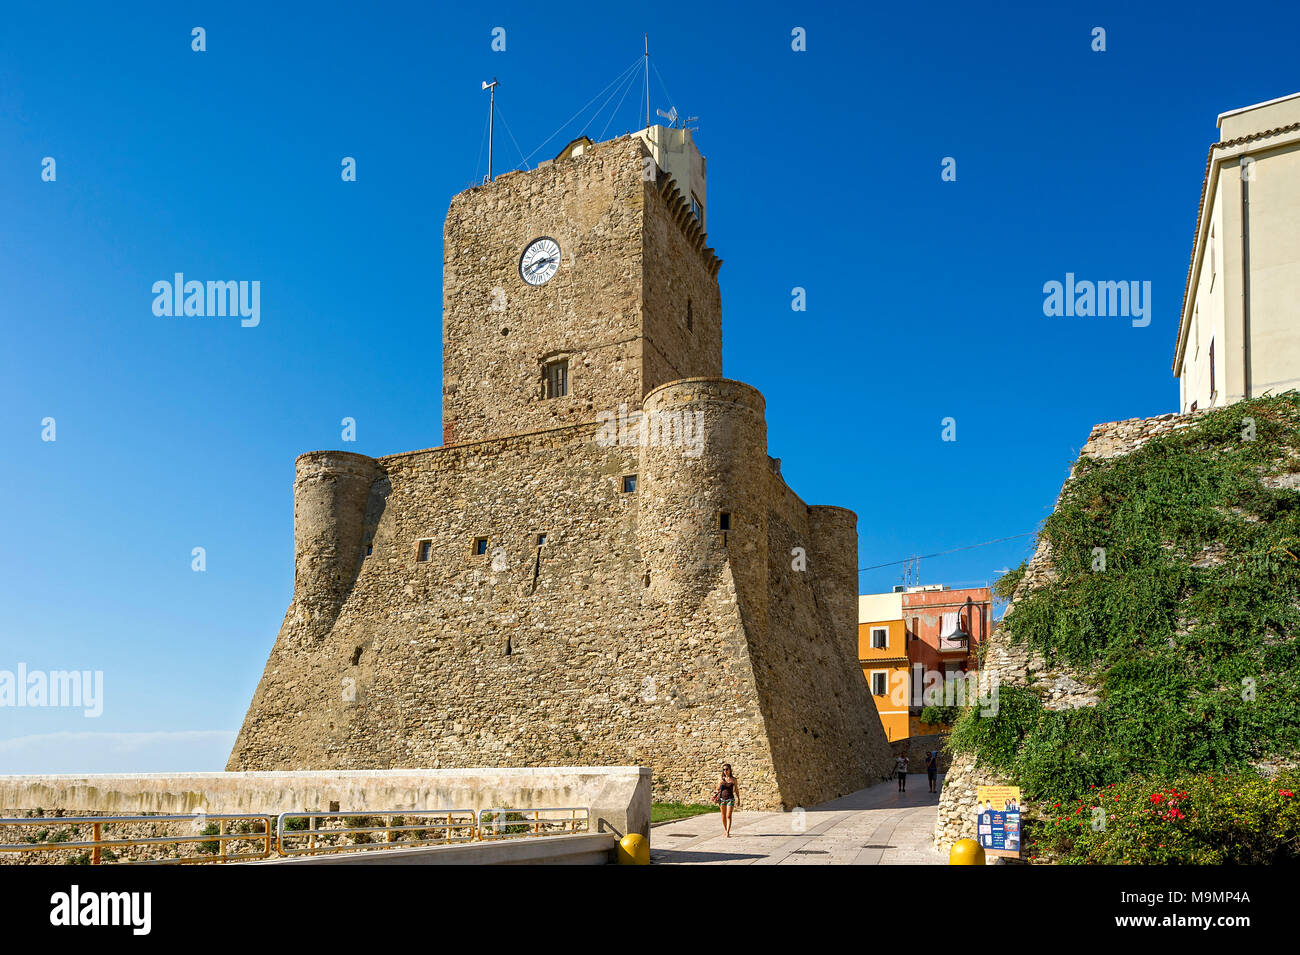 Medieval Staufer fort, Castello Svevo, old town, Lungomare Colombo, Molise region, Italy Stock Photo